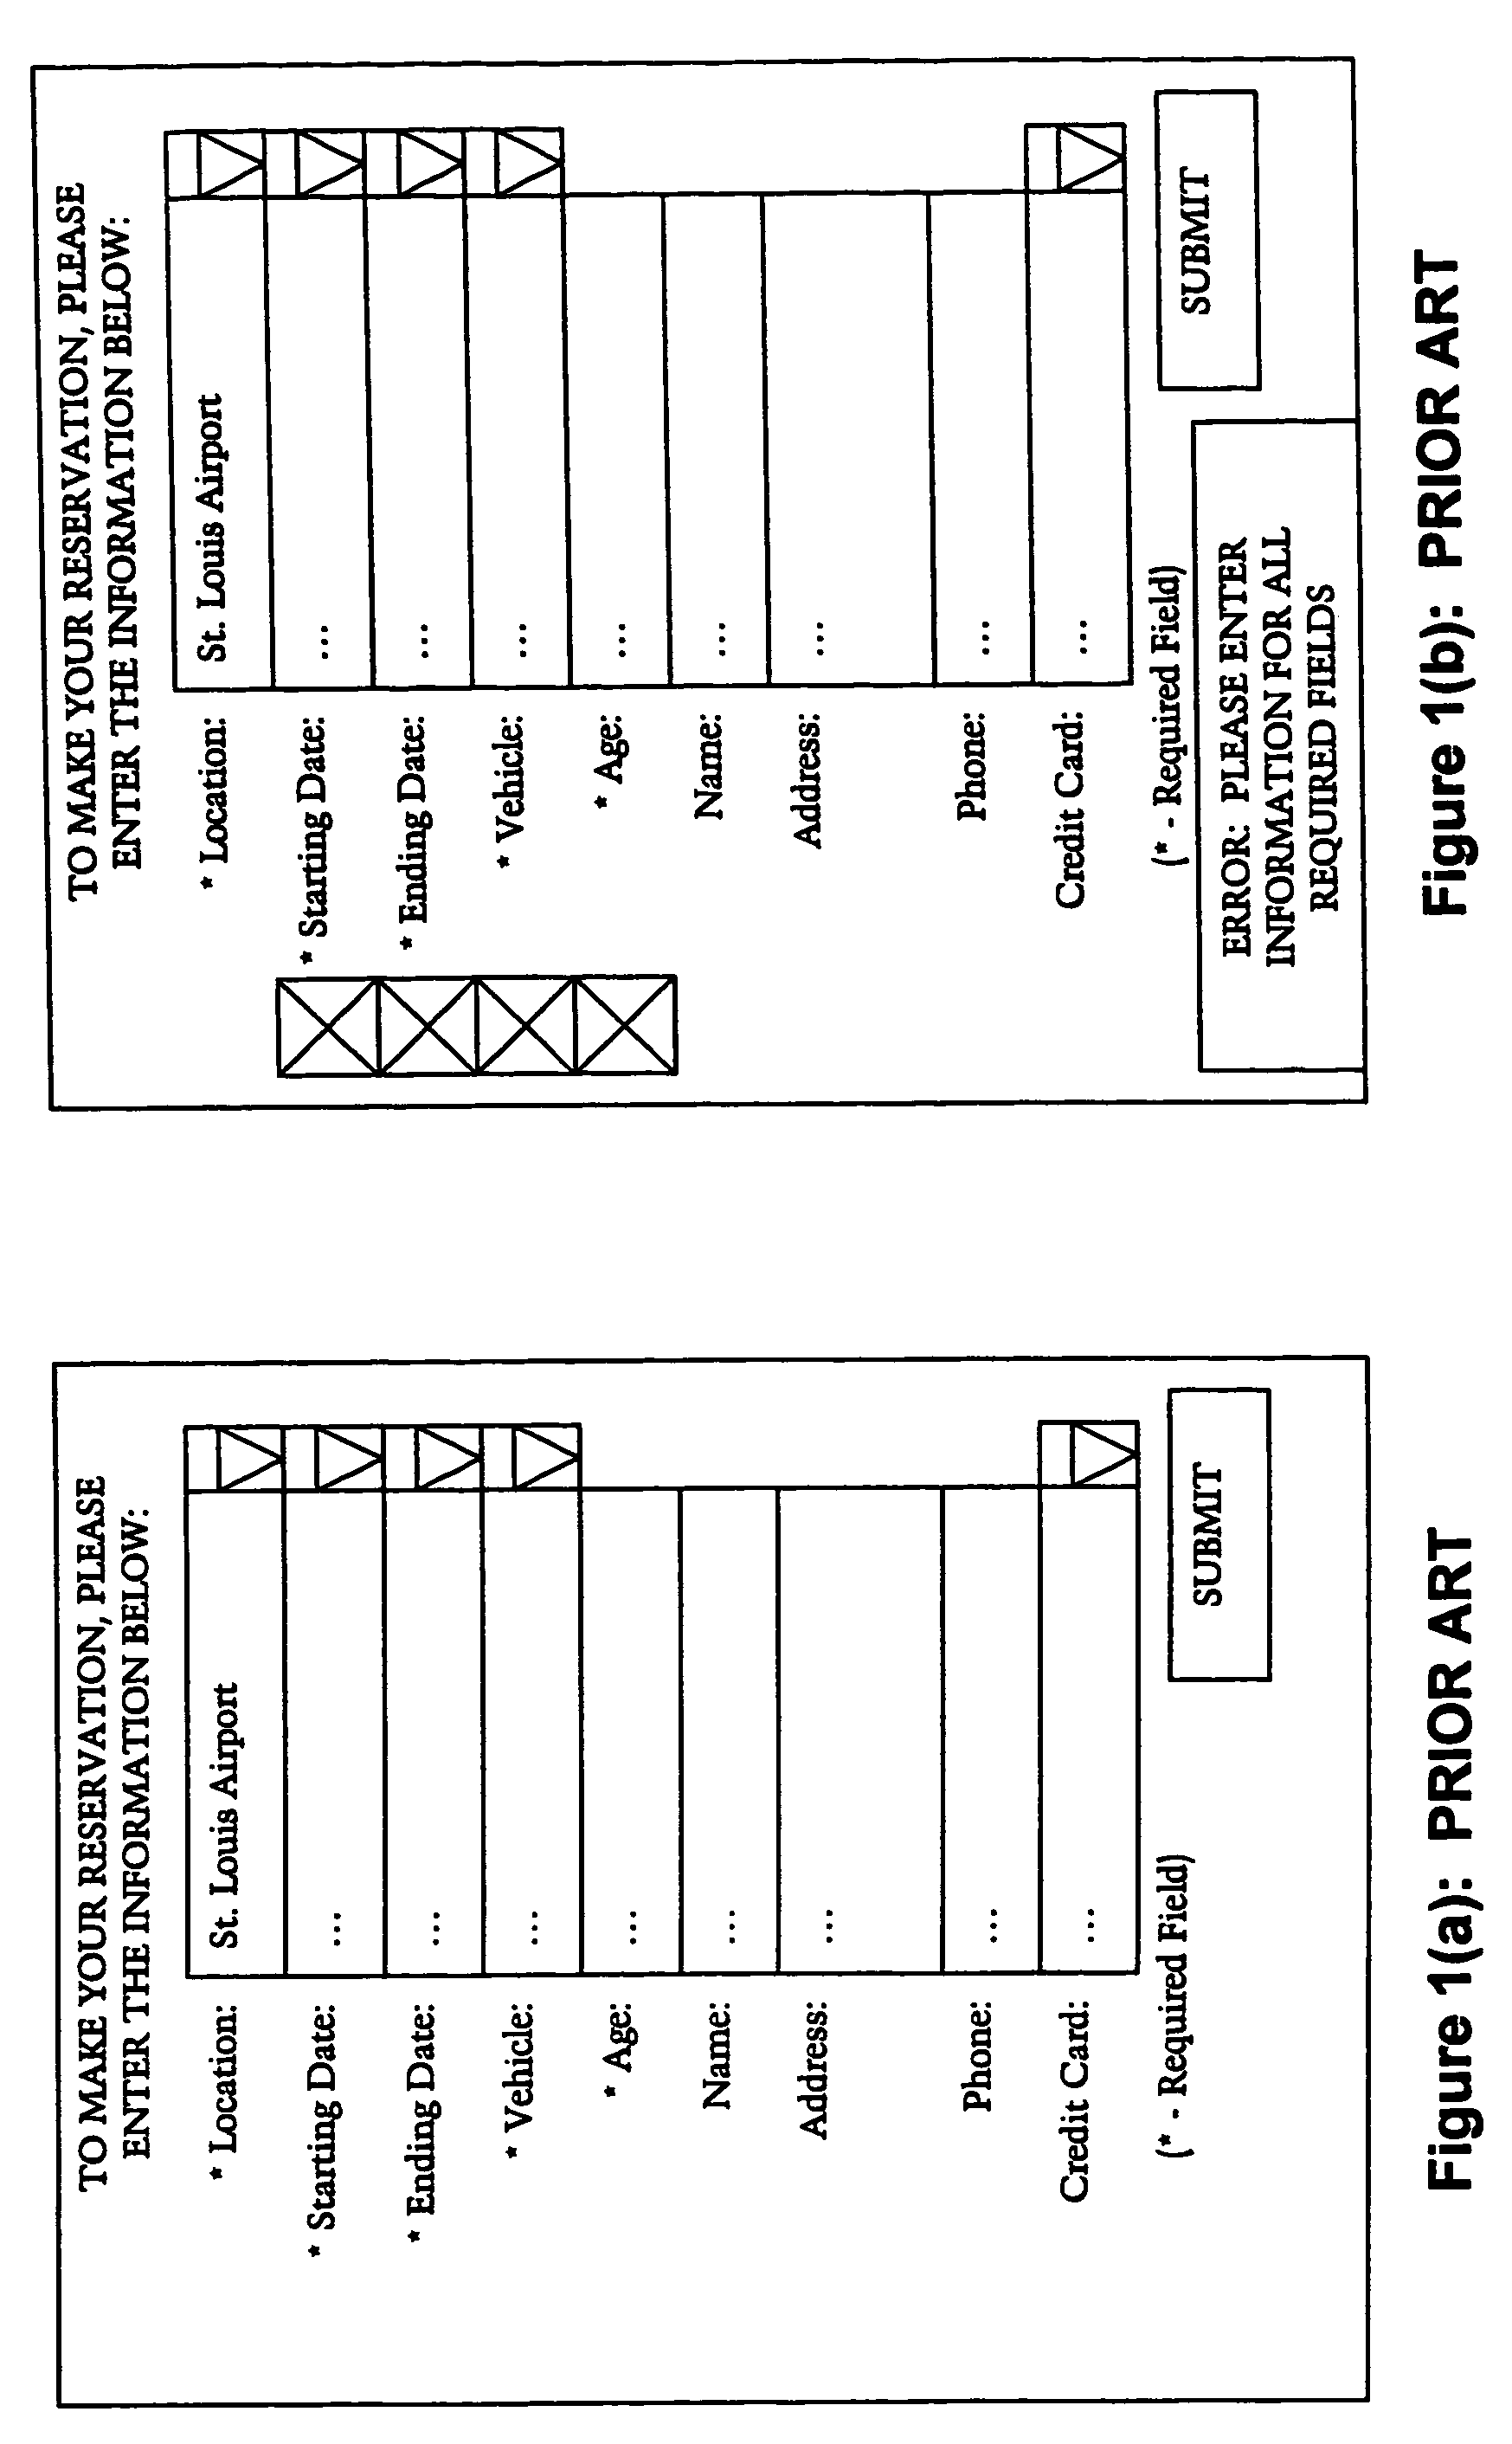 Method and apparatus for improved customer direct on-line reservation of rental vehicles